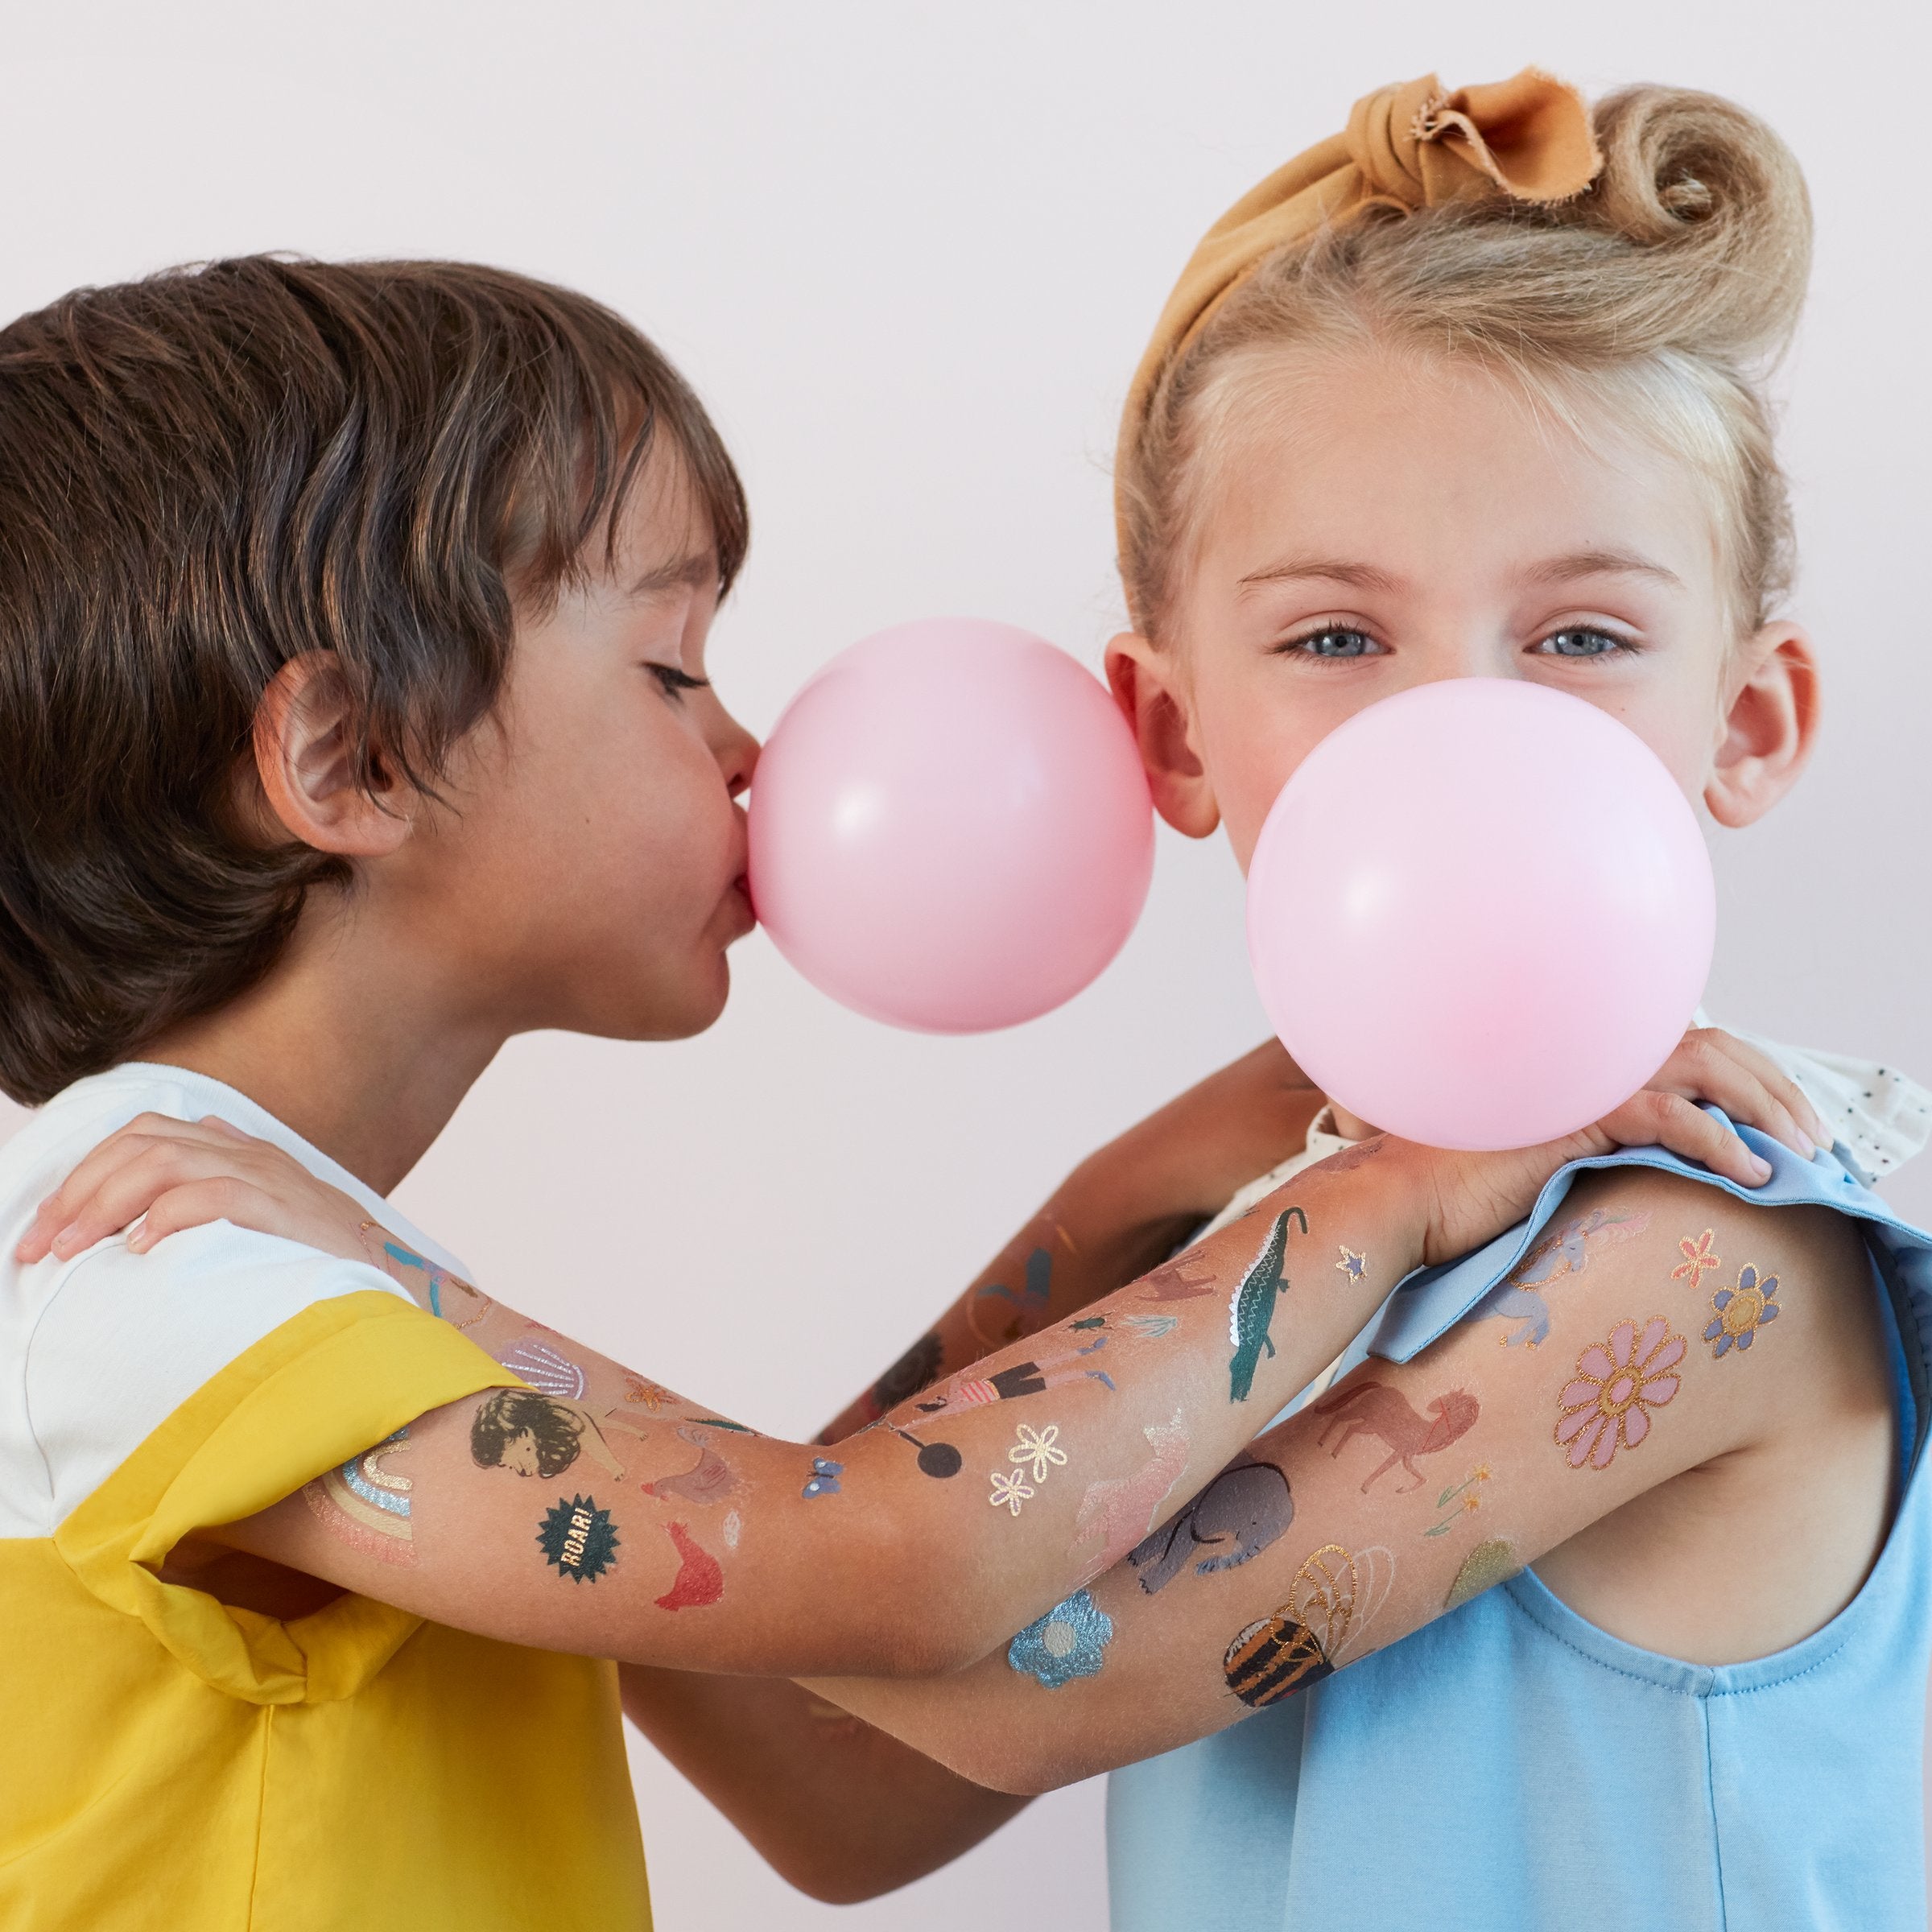 These beautiful fairytale tattoos for kids include icons from princess stories.